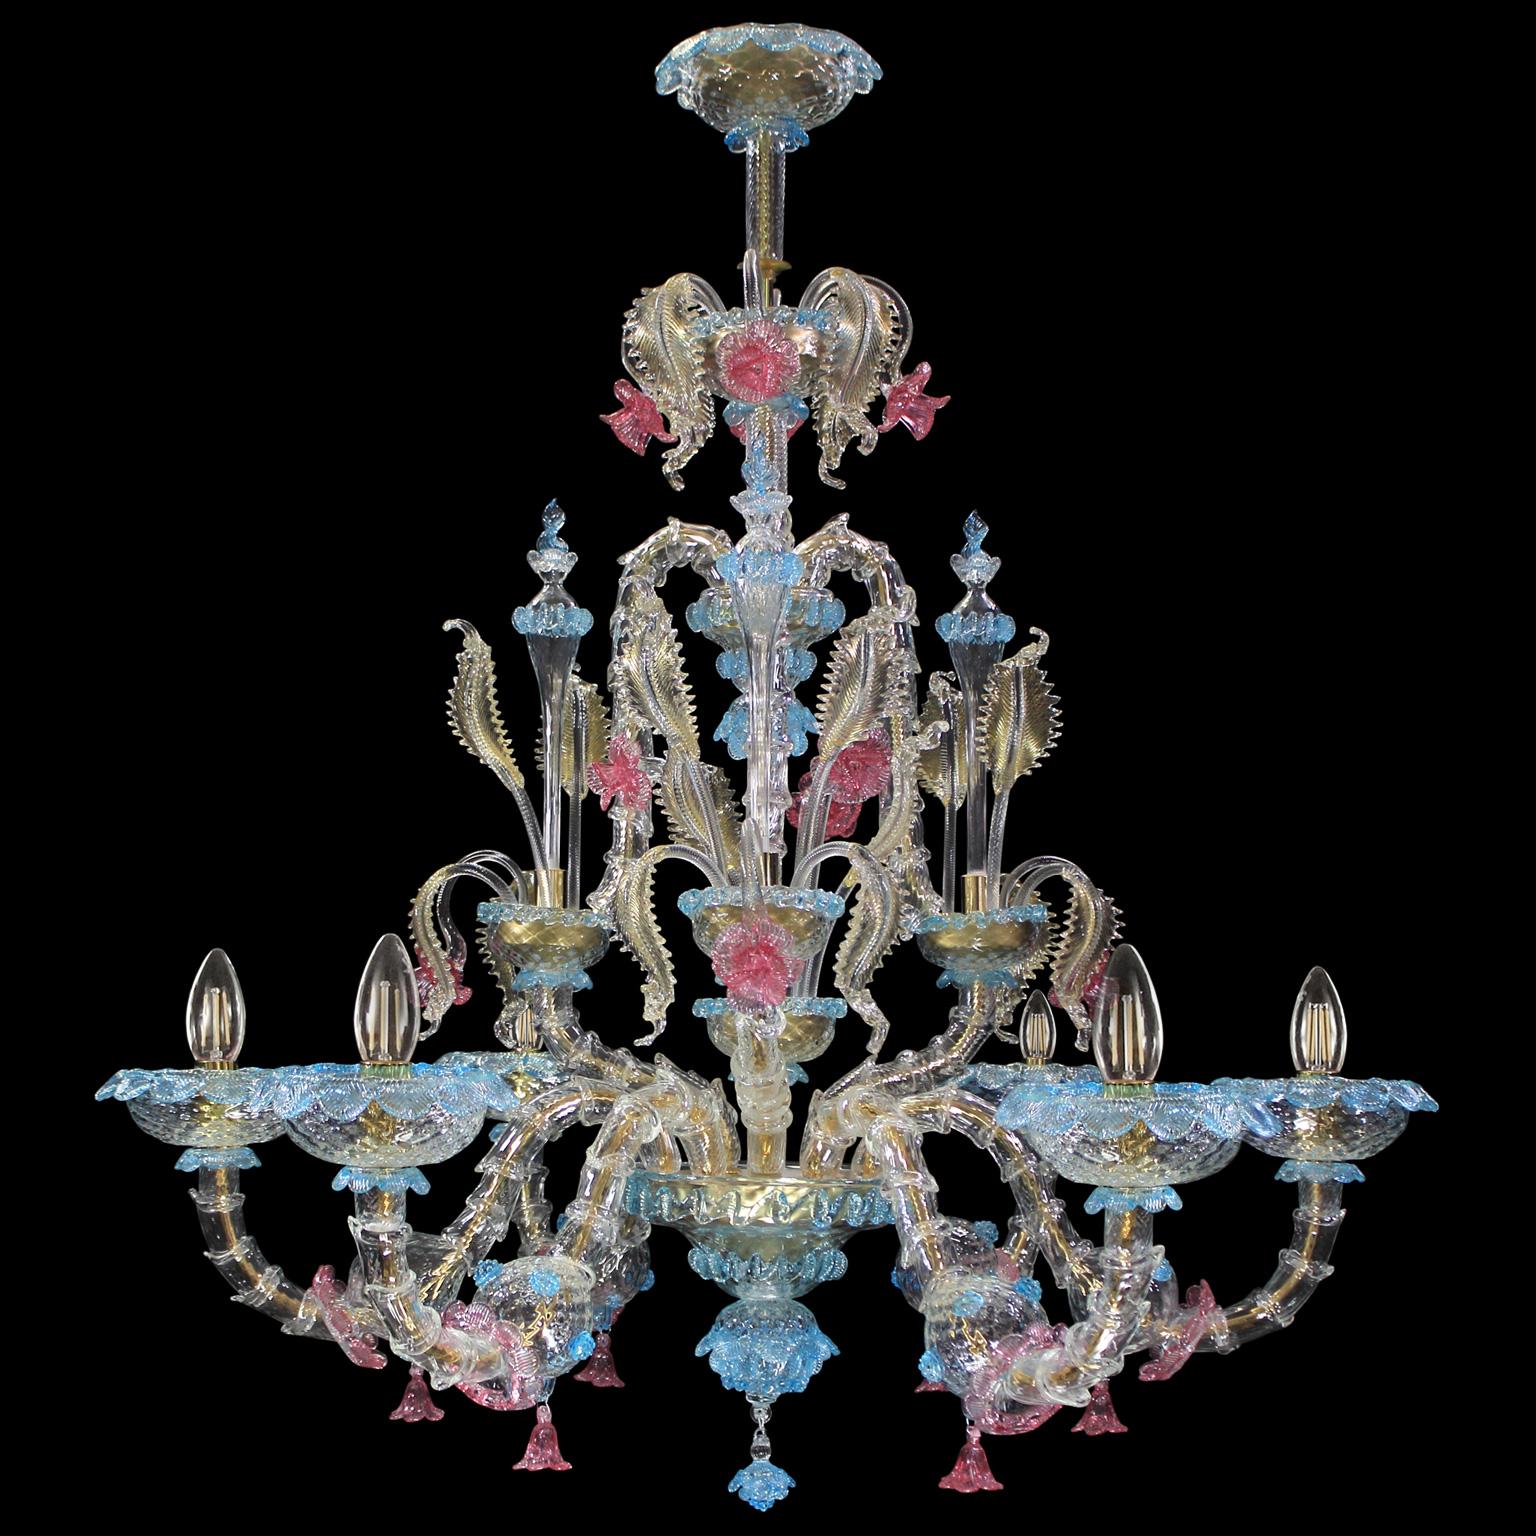 Caesar chandelier Rezzonico 6 lights, crystal, turquoise, pink, gold artistic glass details by Multiforme.
The name, as well as the structure evokes the splendour of the past centuries. It is an evergreen model, a Classic product manufactured by our